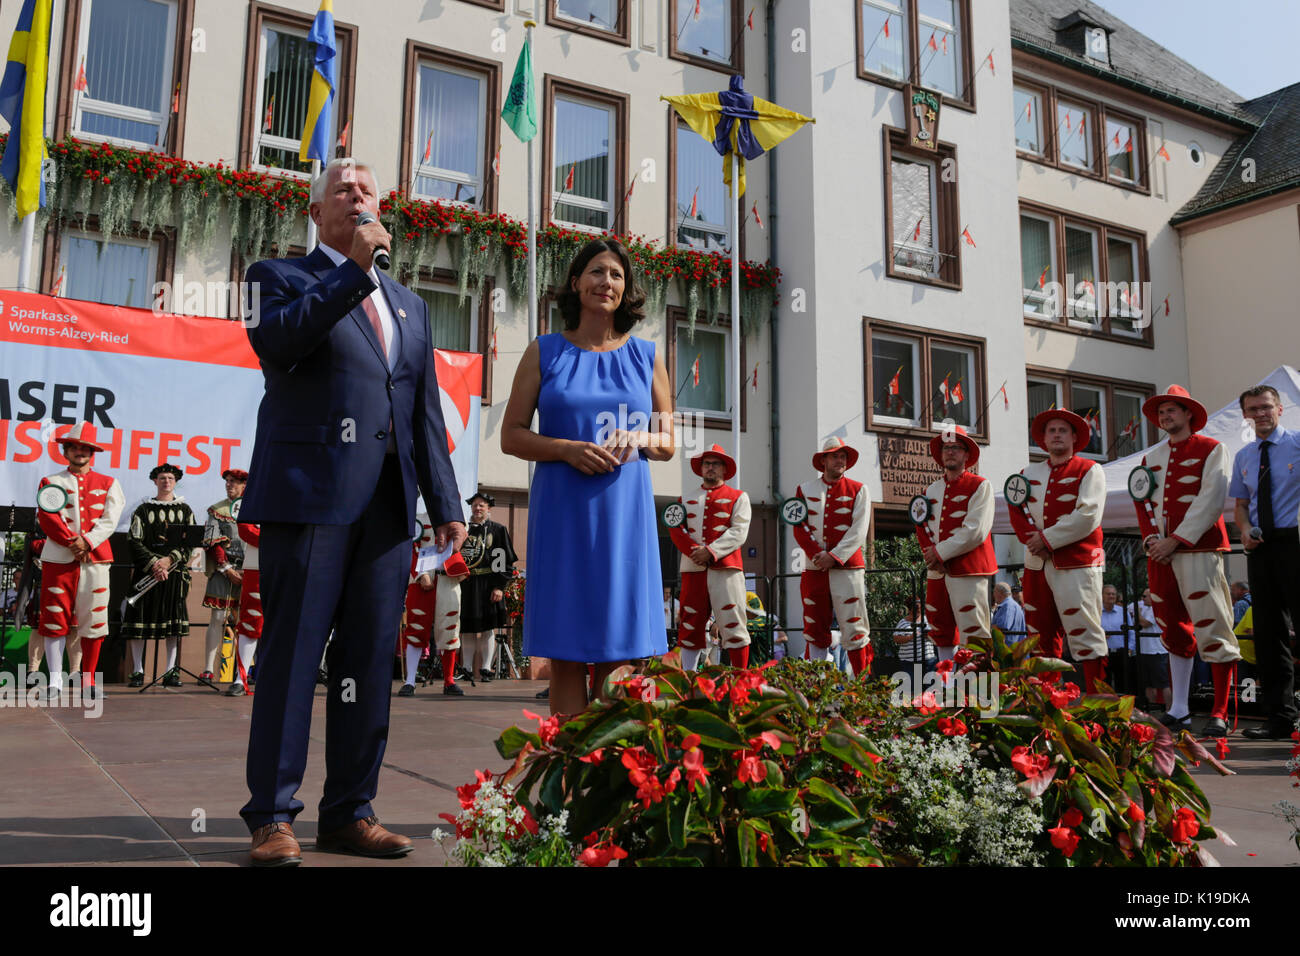 Worms, Germany. 26th August 2017. The Lord Mayor of Worms, Michael Kissel, addresses the audience. Daniela Schmitt stands next to him. The largest wine and funfair along the Rhine, the Backfischfest started in Worms with the traditional handing over of power from the Lord Mayor to the mayor of the fishermen’s lea. The ceremony was framed by dances and music. Secretary of state Daniela Schmitt from the Rhineland-Palatinate ministry for economy, transport, agriculture and viticulture attended the opening Credit: Michael Debets/Alamy Live News Stock Photo